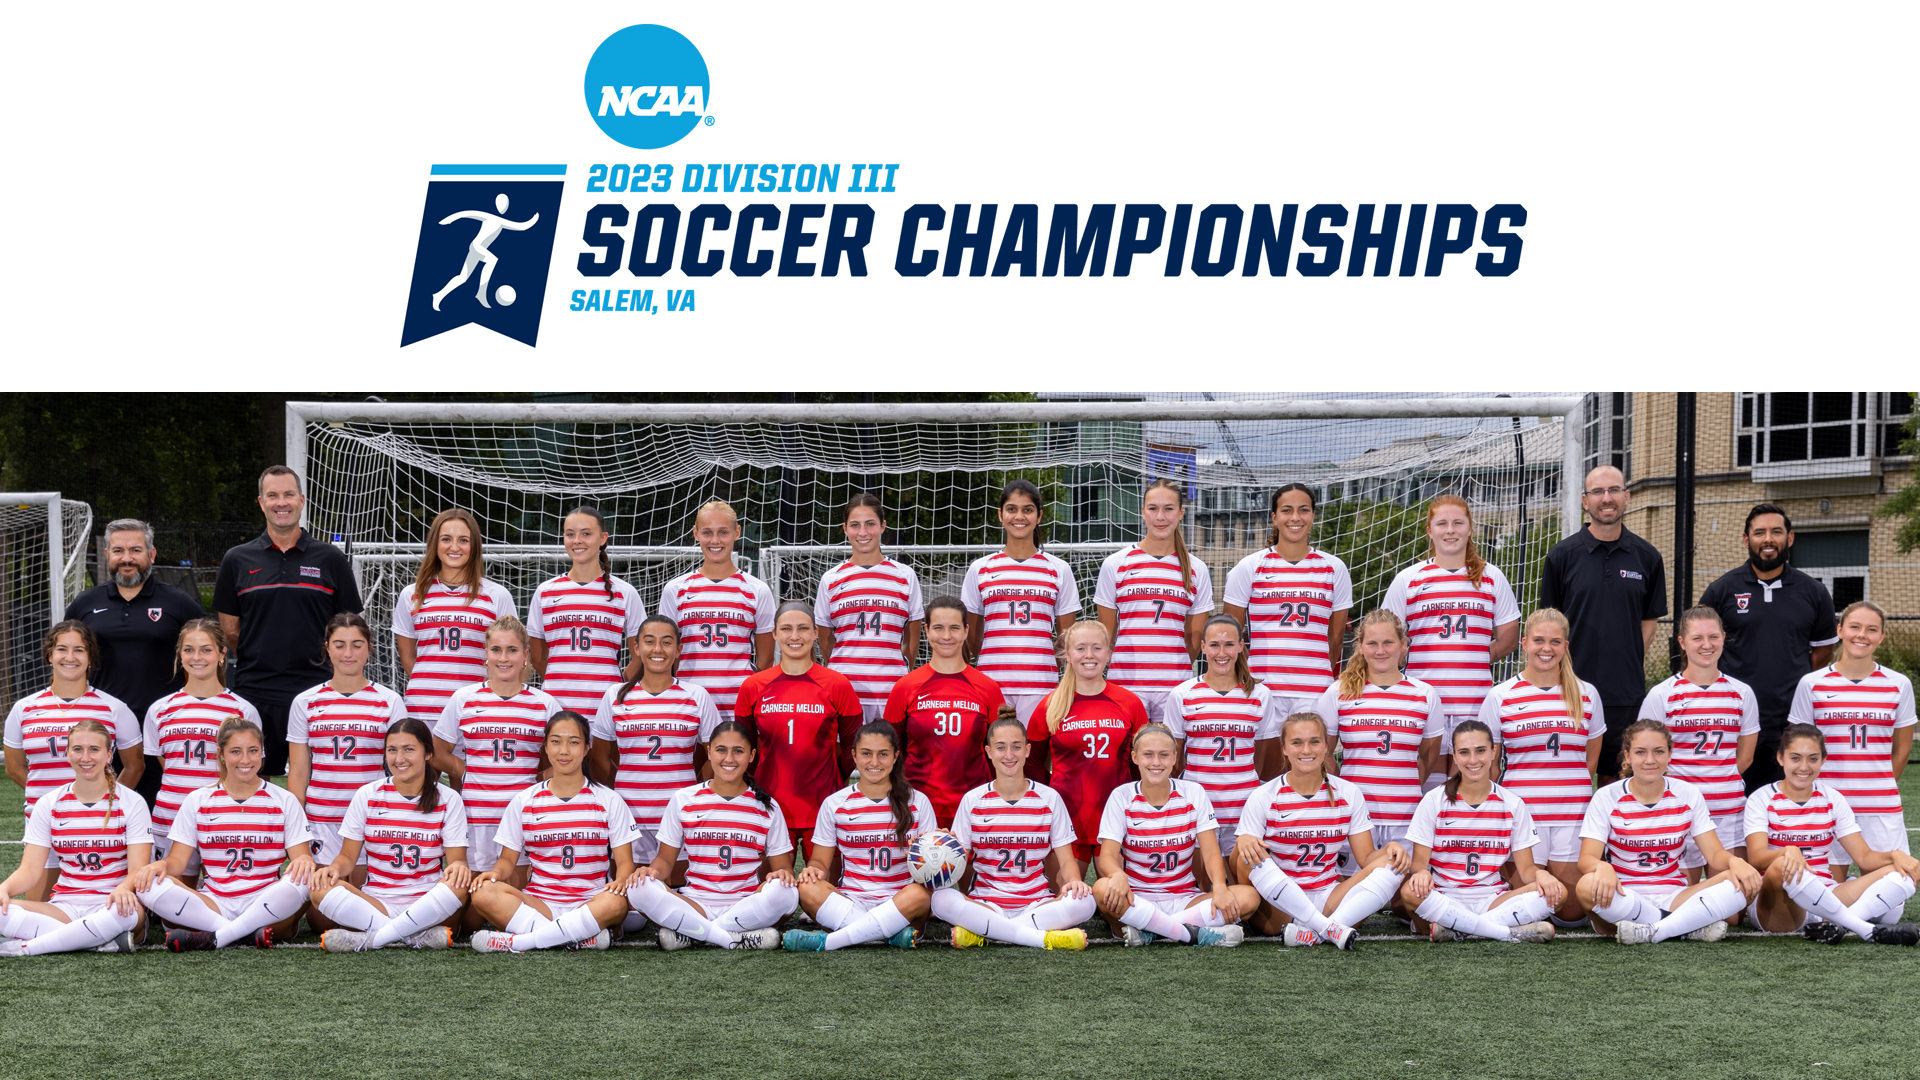 NCAA logo with text reading 2023 Division III Soccer Championships Salem, VA above photo of women's soccer team photo with members in three rows